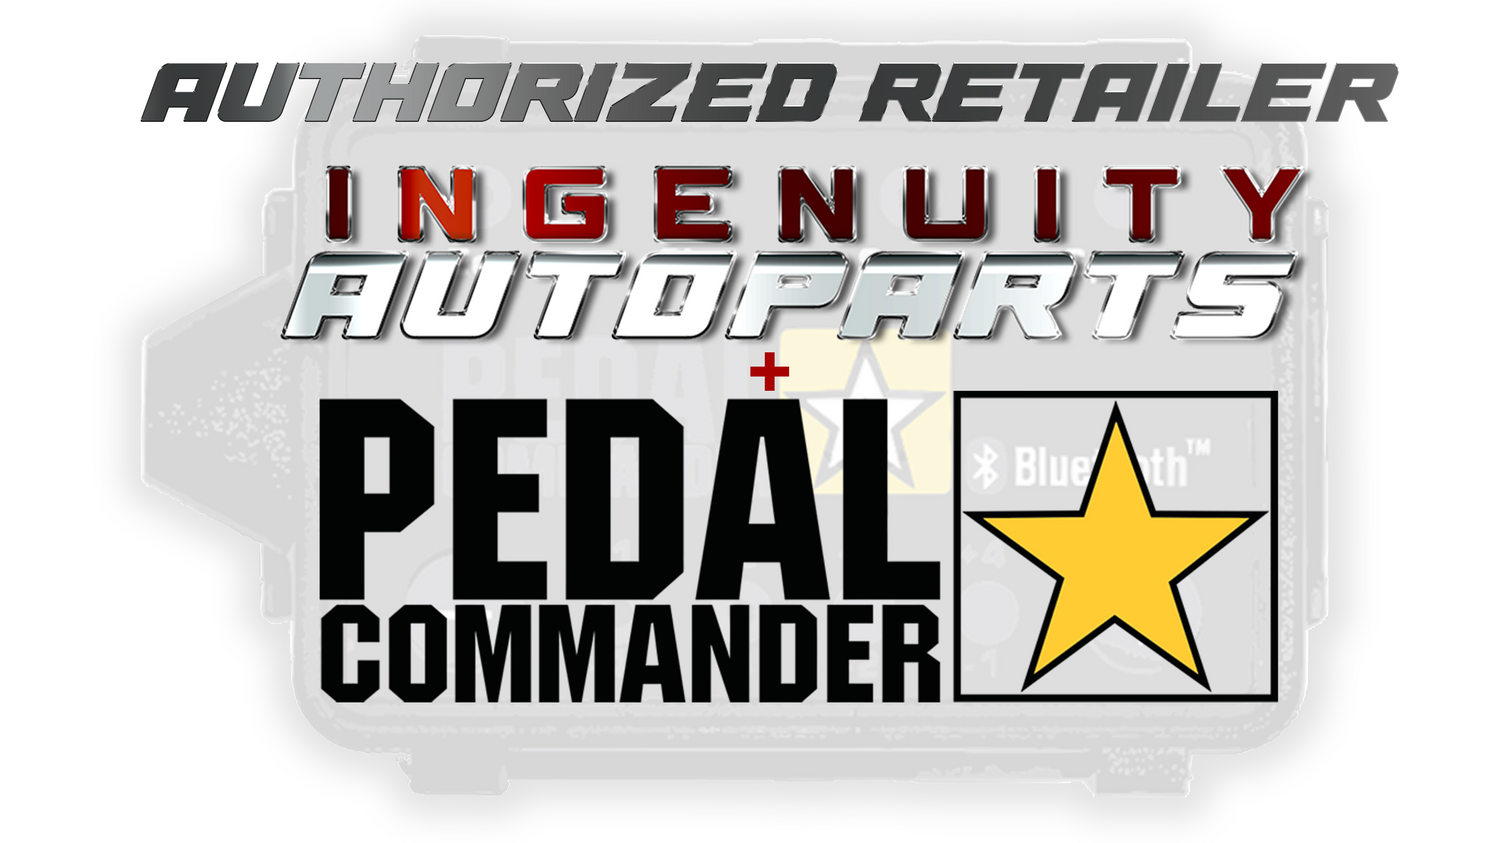 Pedal Commander Overview - A Brief Explainer of The Pedal Commander and its Functions